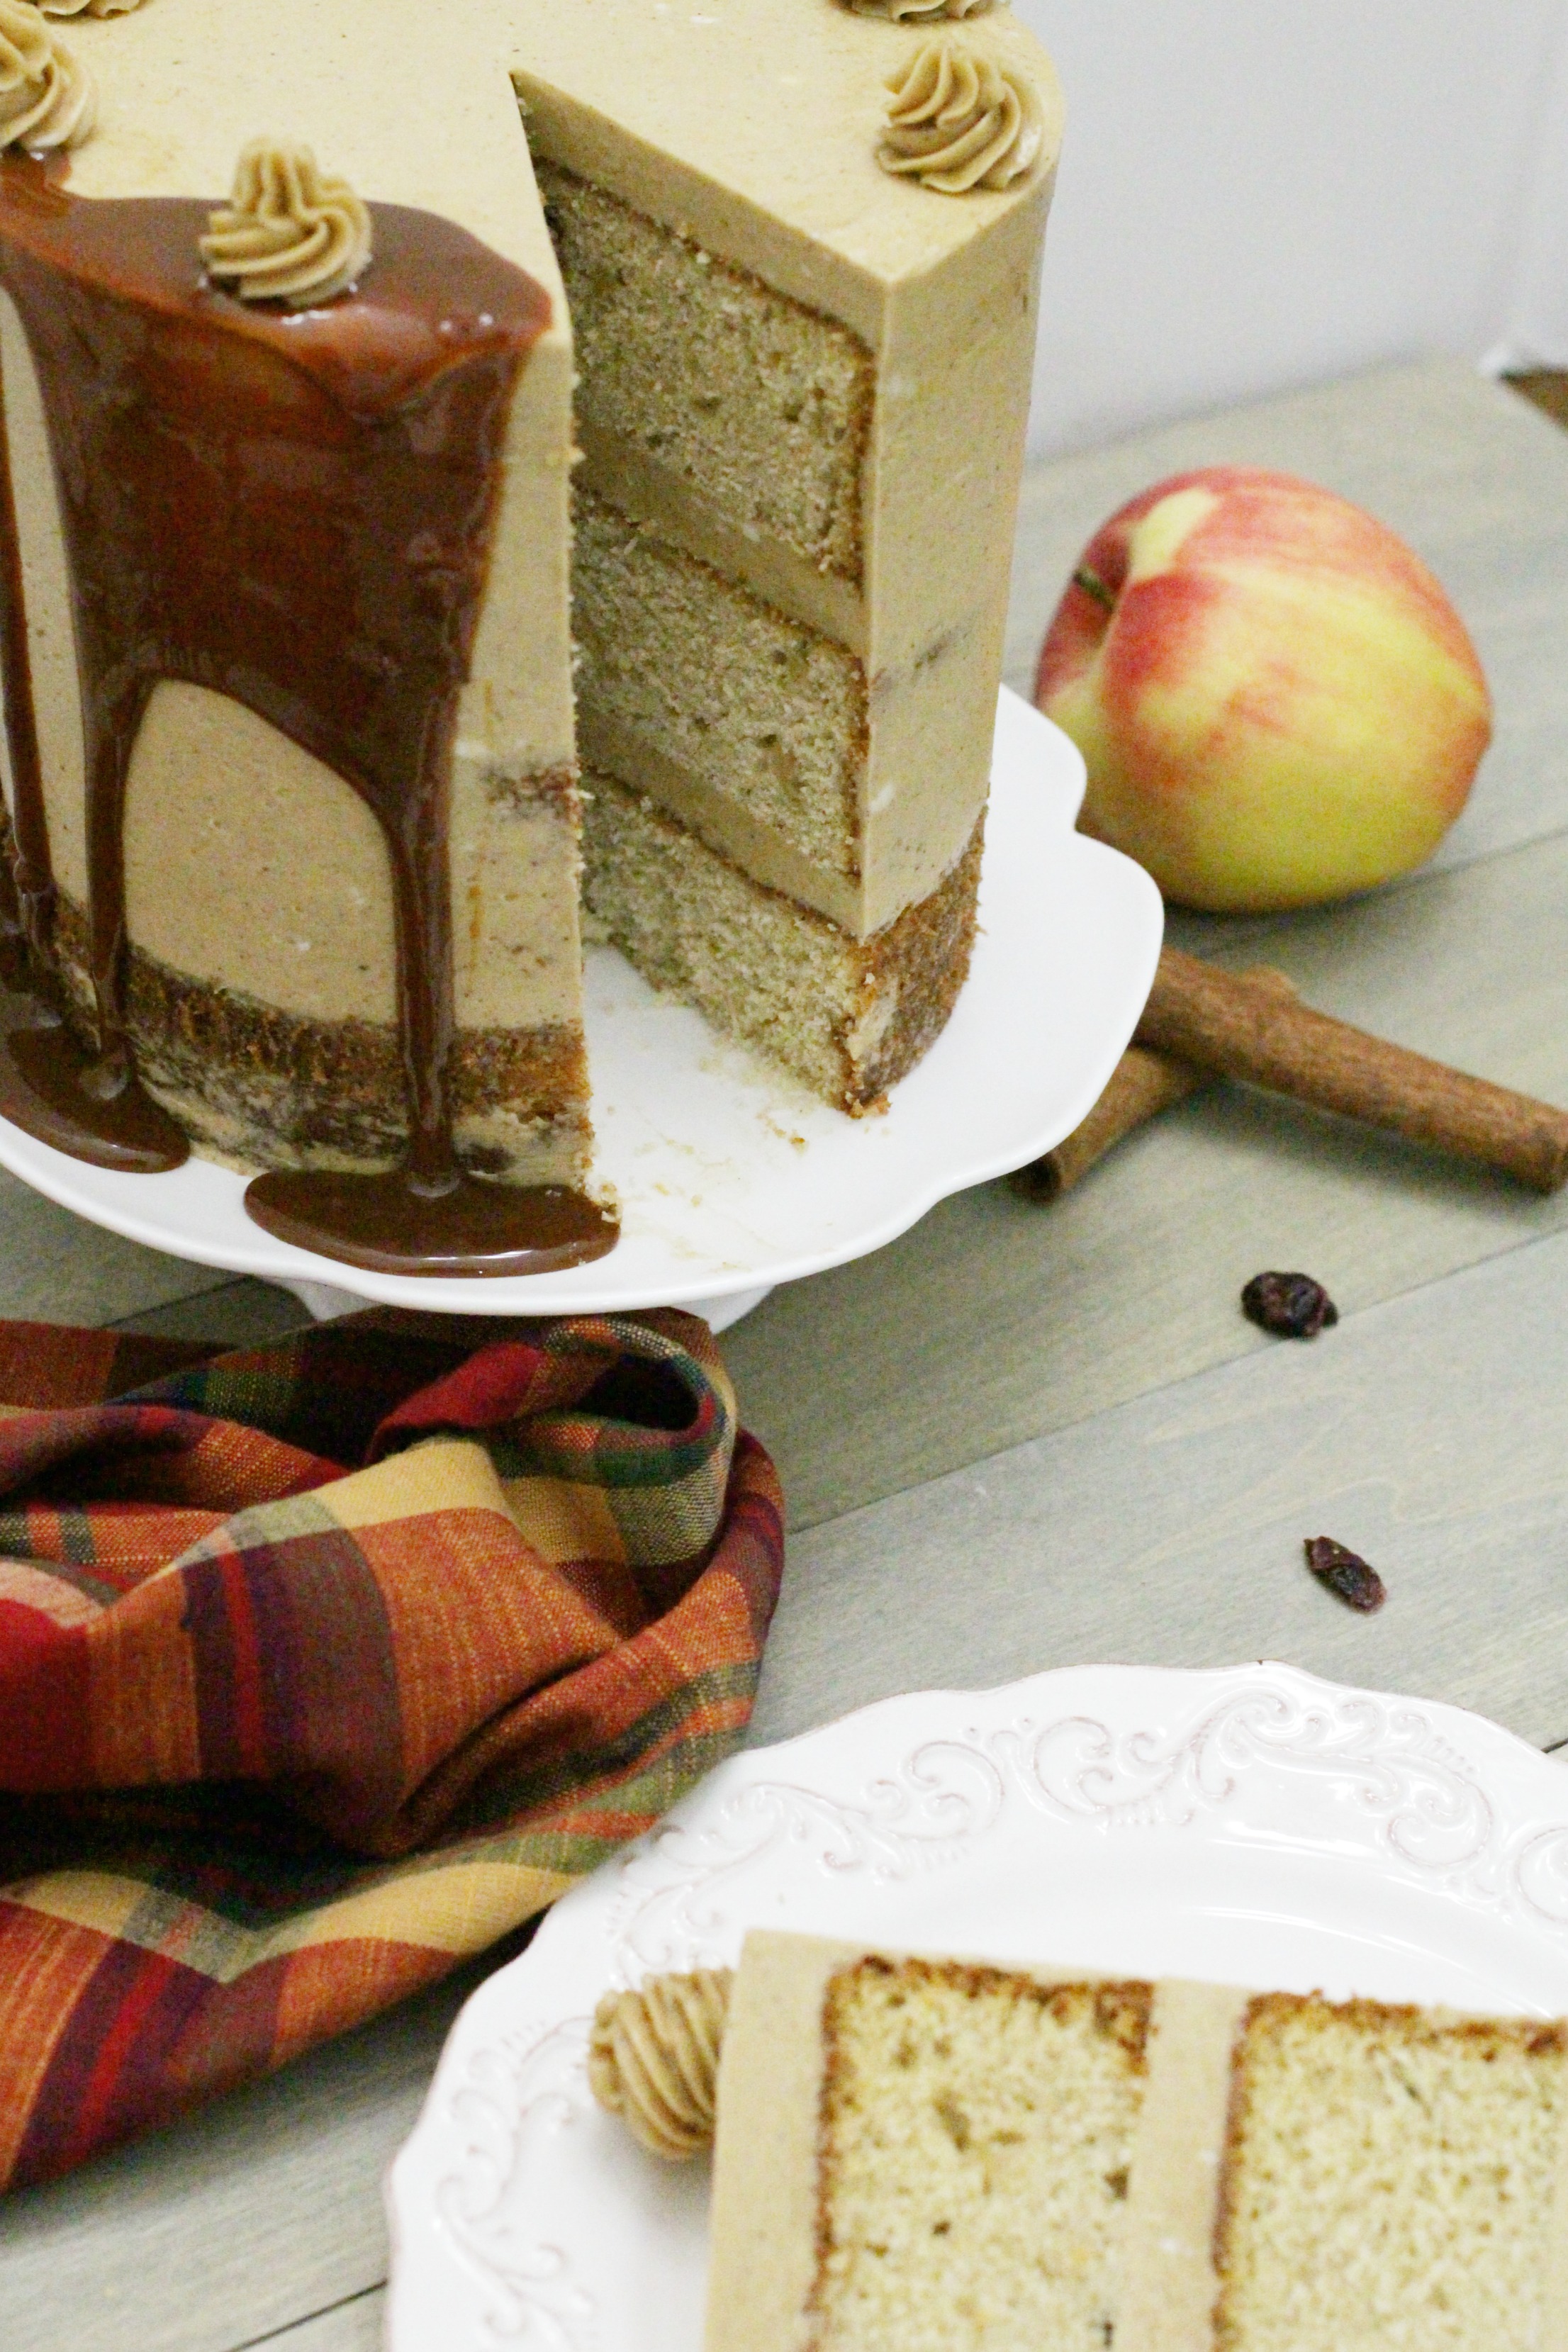 Behind the cake- Cranberry apple cake frosted with brown sugar spice Swiss meringue with dripping caramel